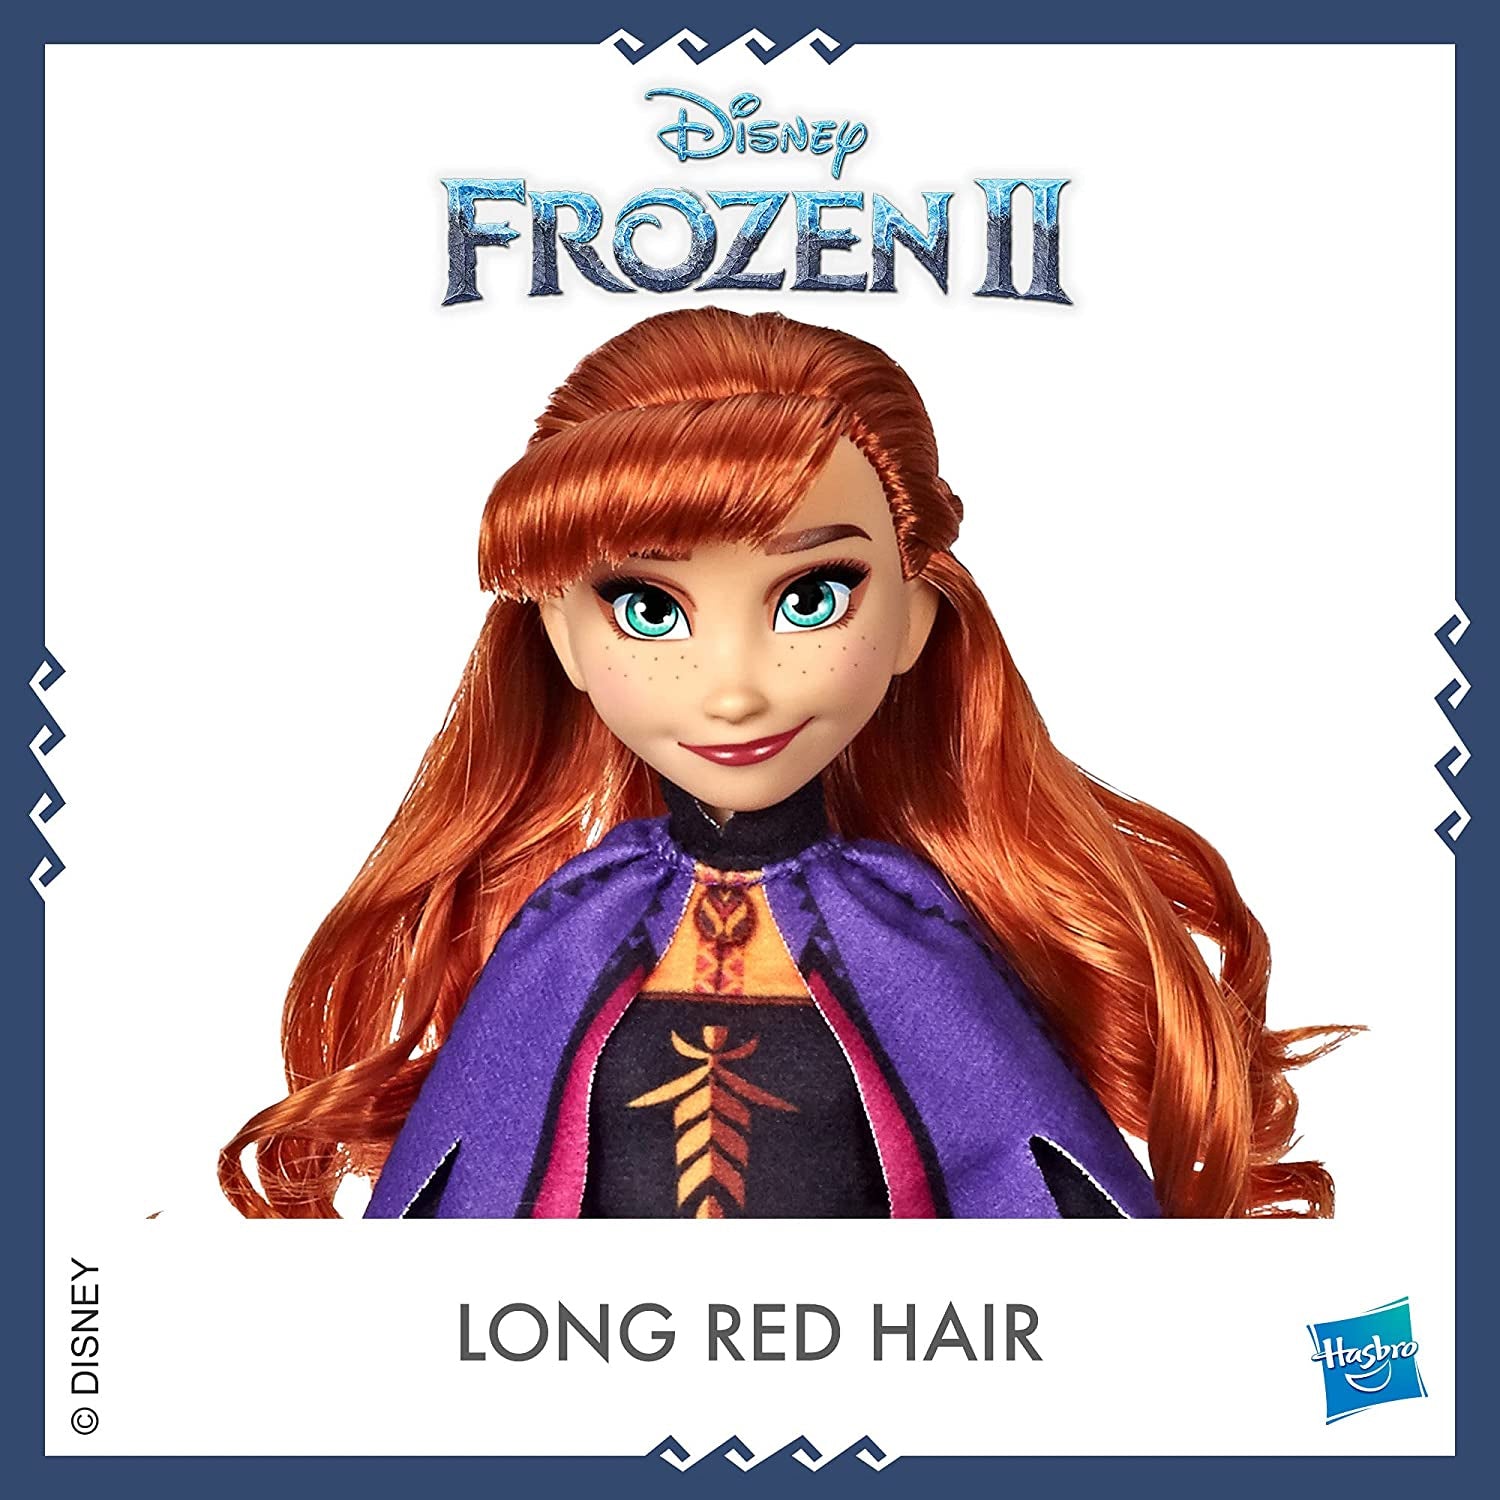 Disney Frozen Anna Fashion Doll with Long Red Hair & Outfit Inspired by Frozen 2